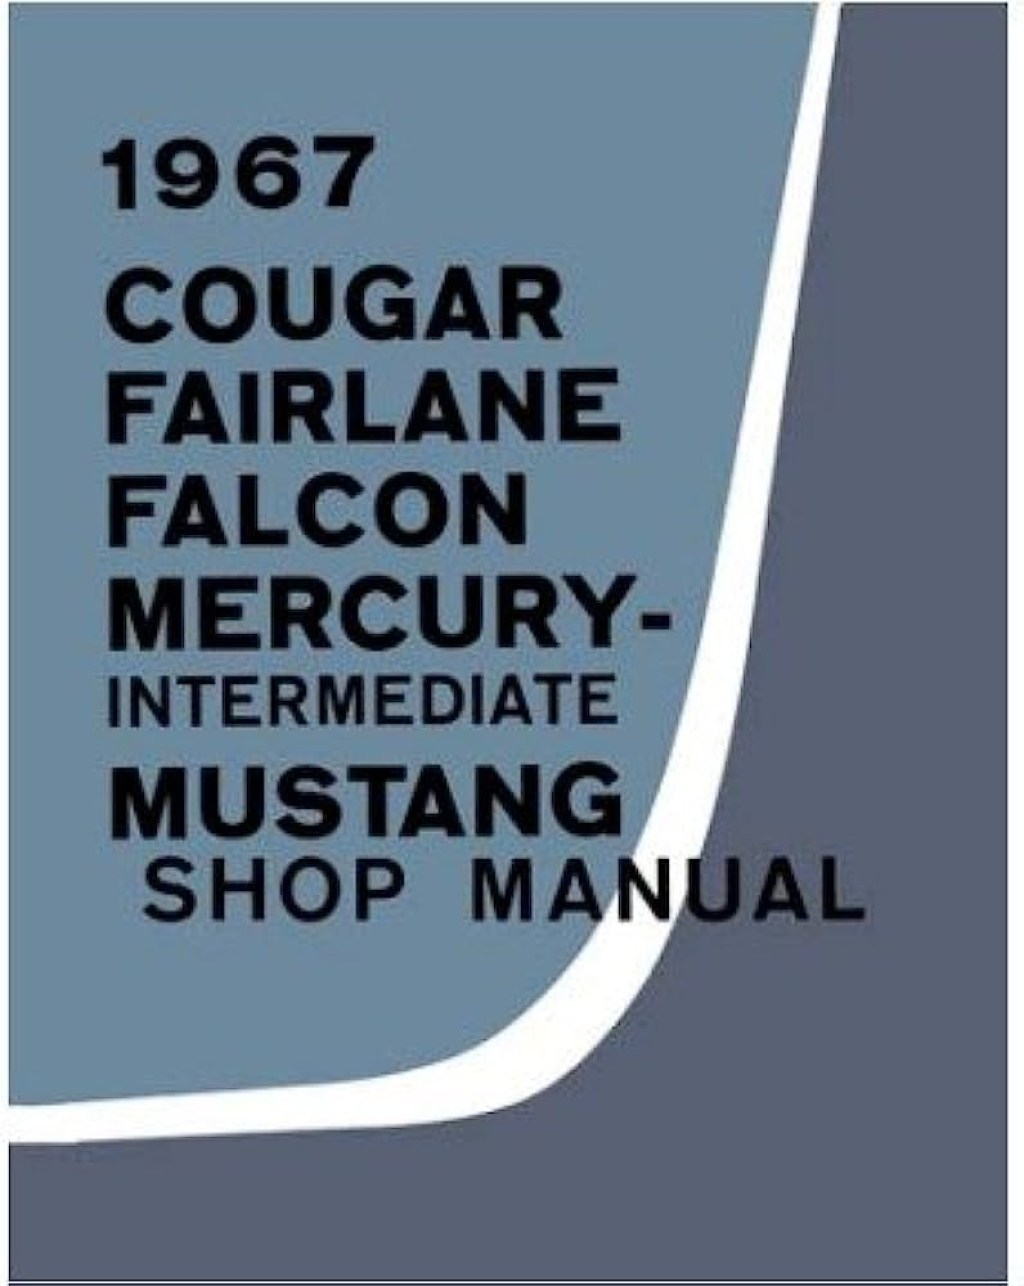 Picture of: Cougar Fairlane Falcon Mustang Service Manual